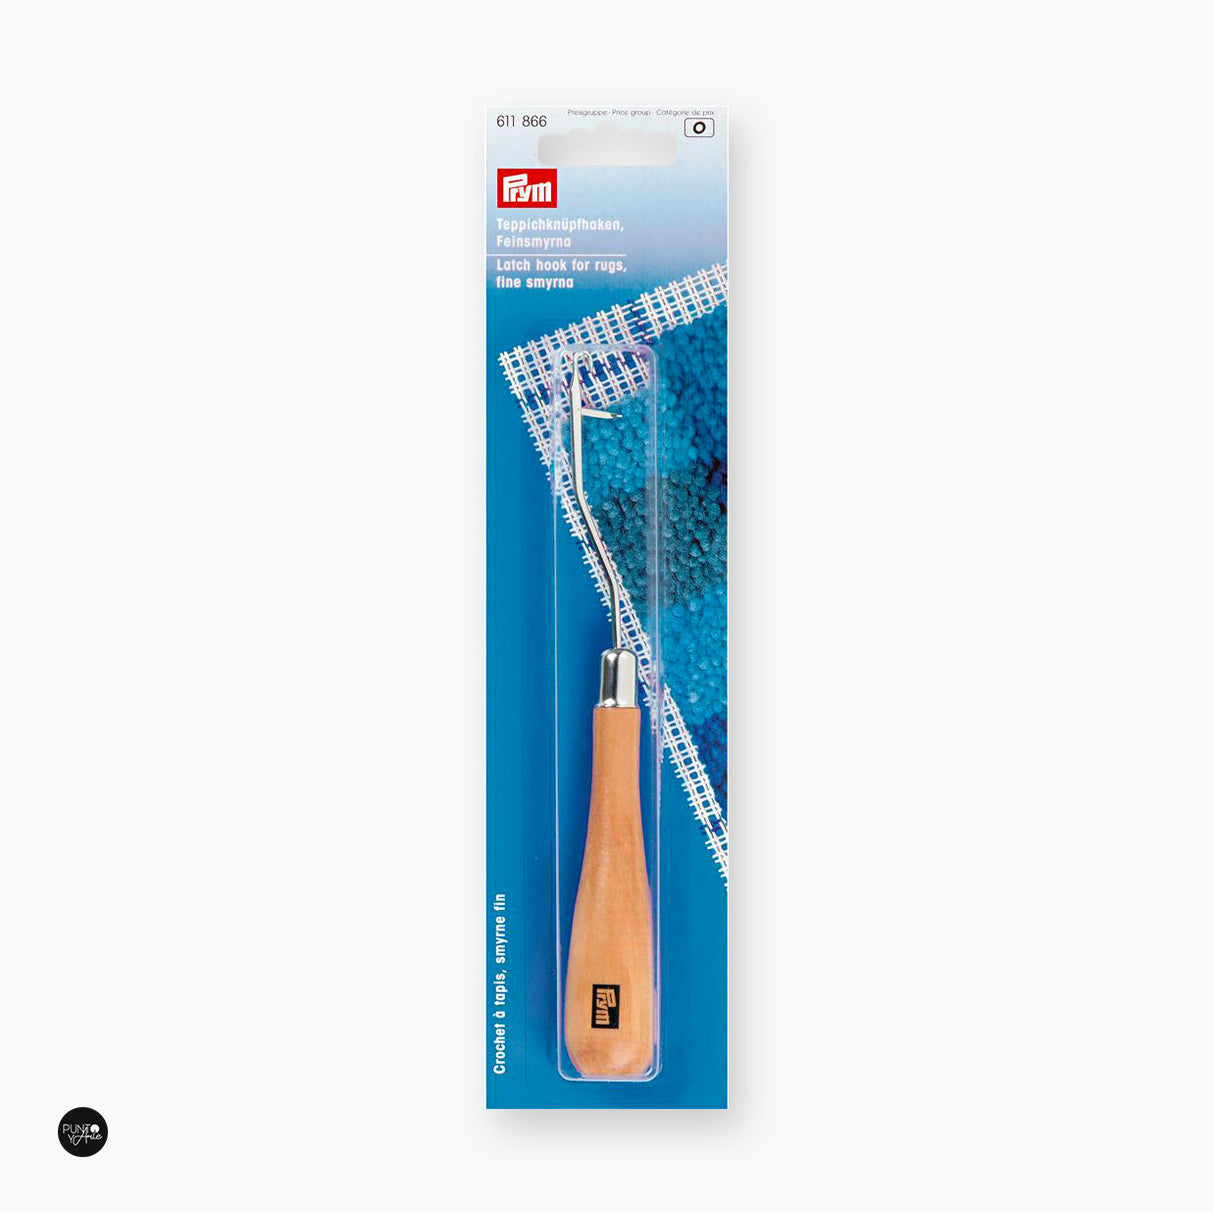 Prym Latch Hook Needle - Essential Tool for Creative Knitting Projects